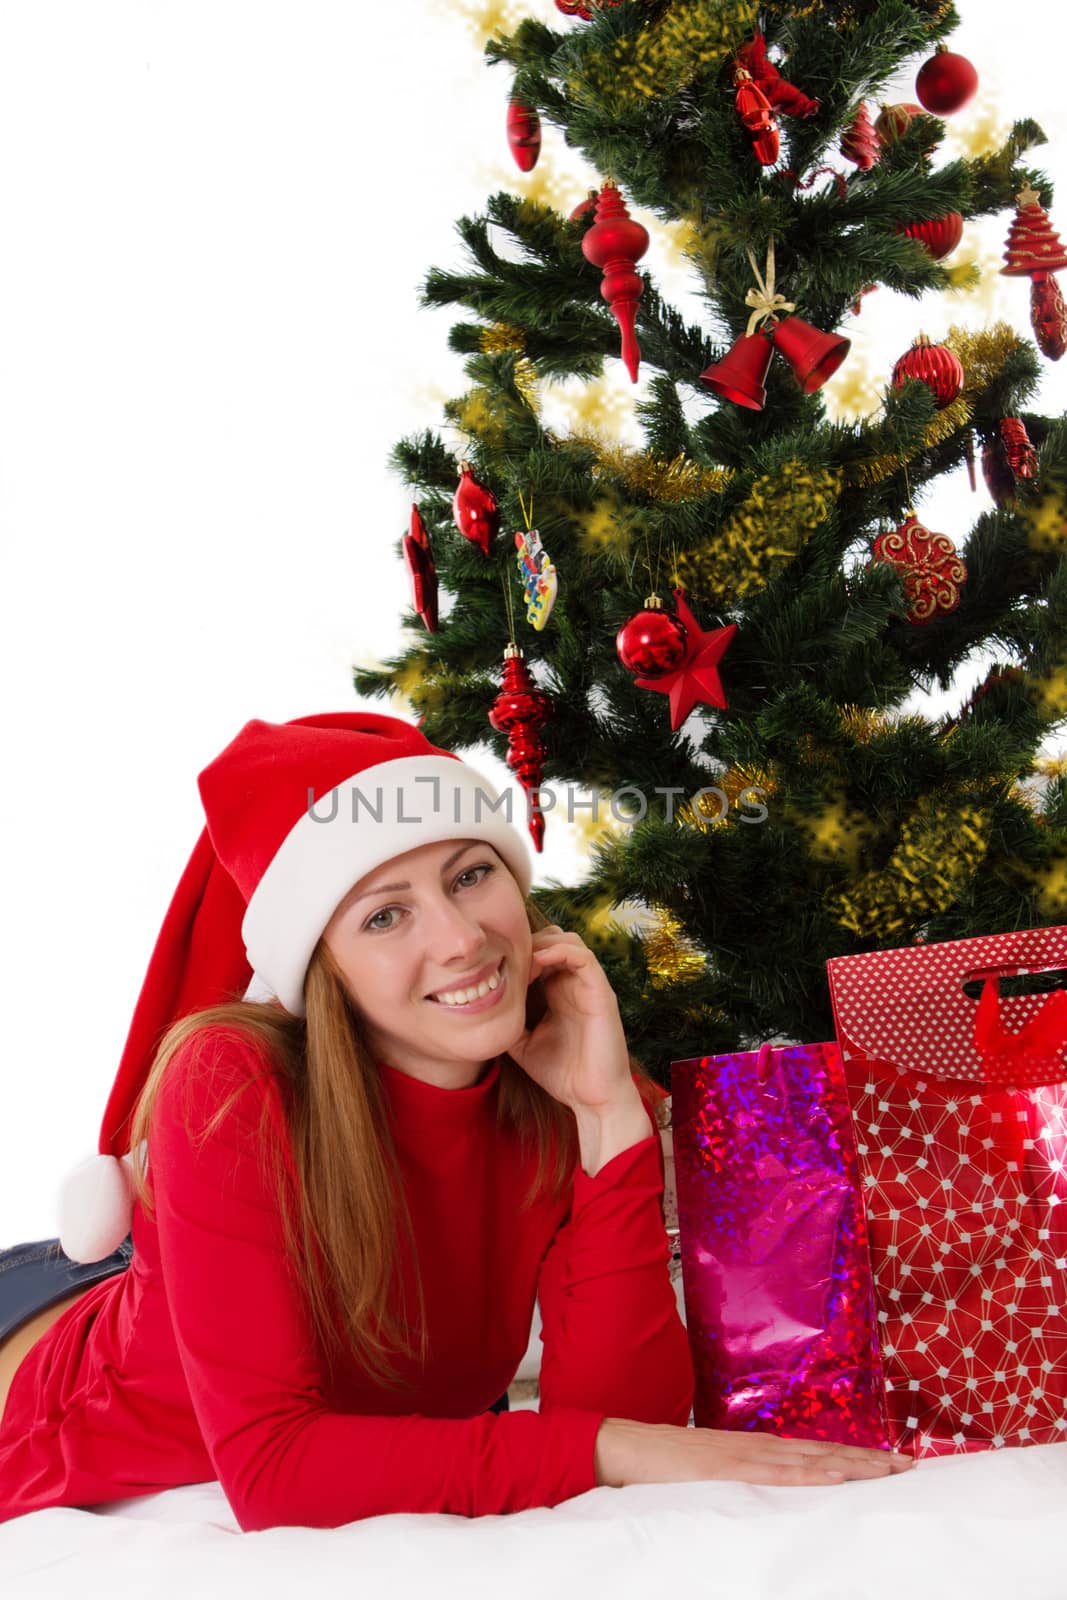 Smiling woman in red lying under Christmas tree with gifts